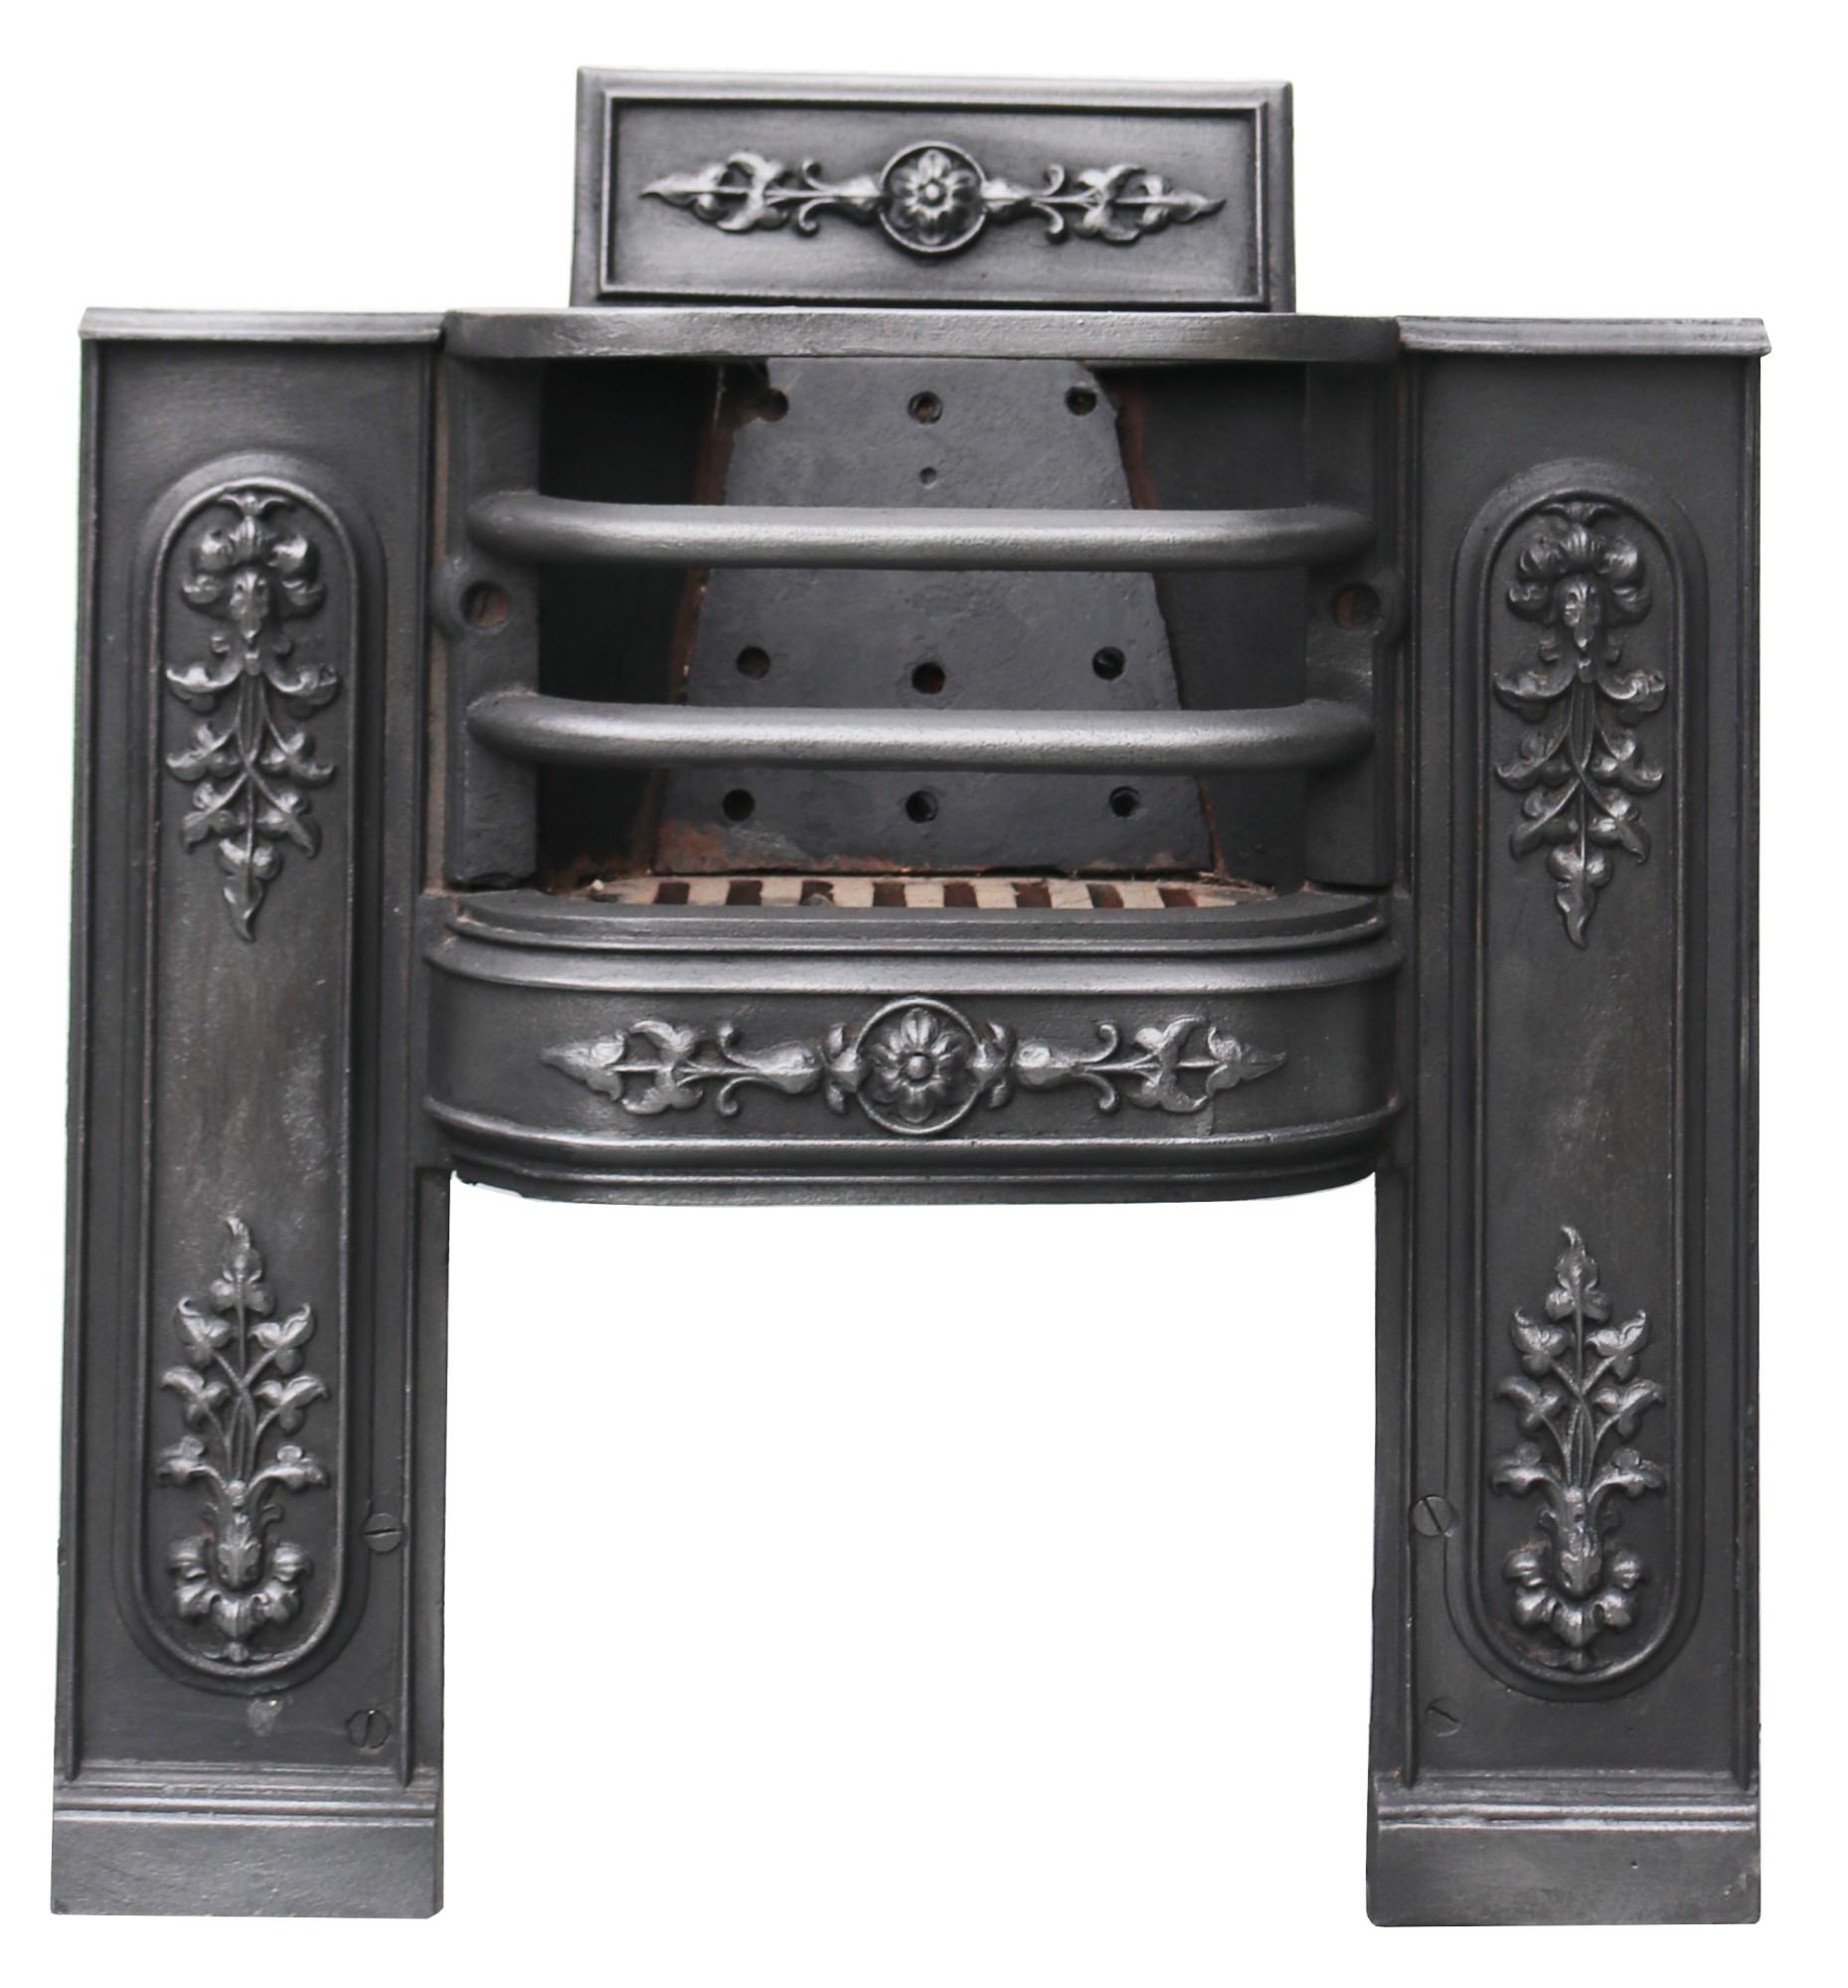 A good quality William IV Hob grate. Finished in black graphite polish.